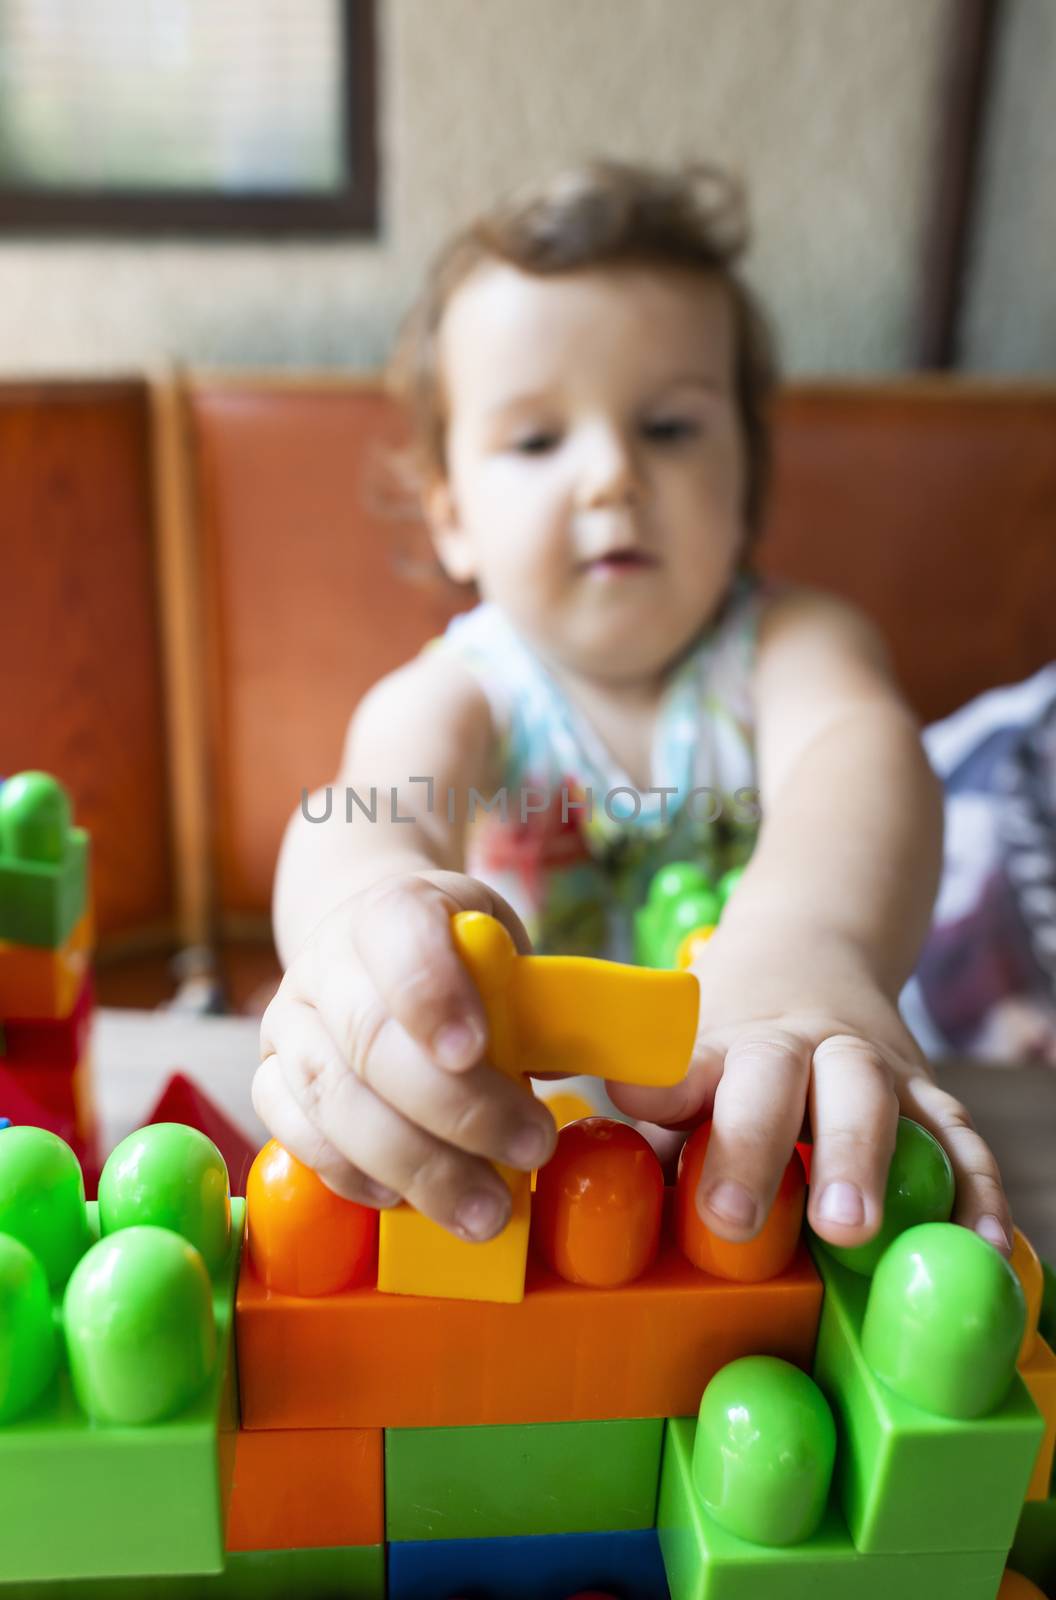 Little girl playing with multicolor blocks